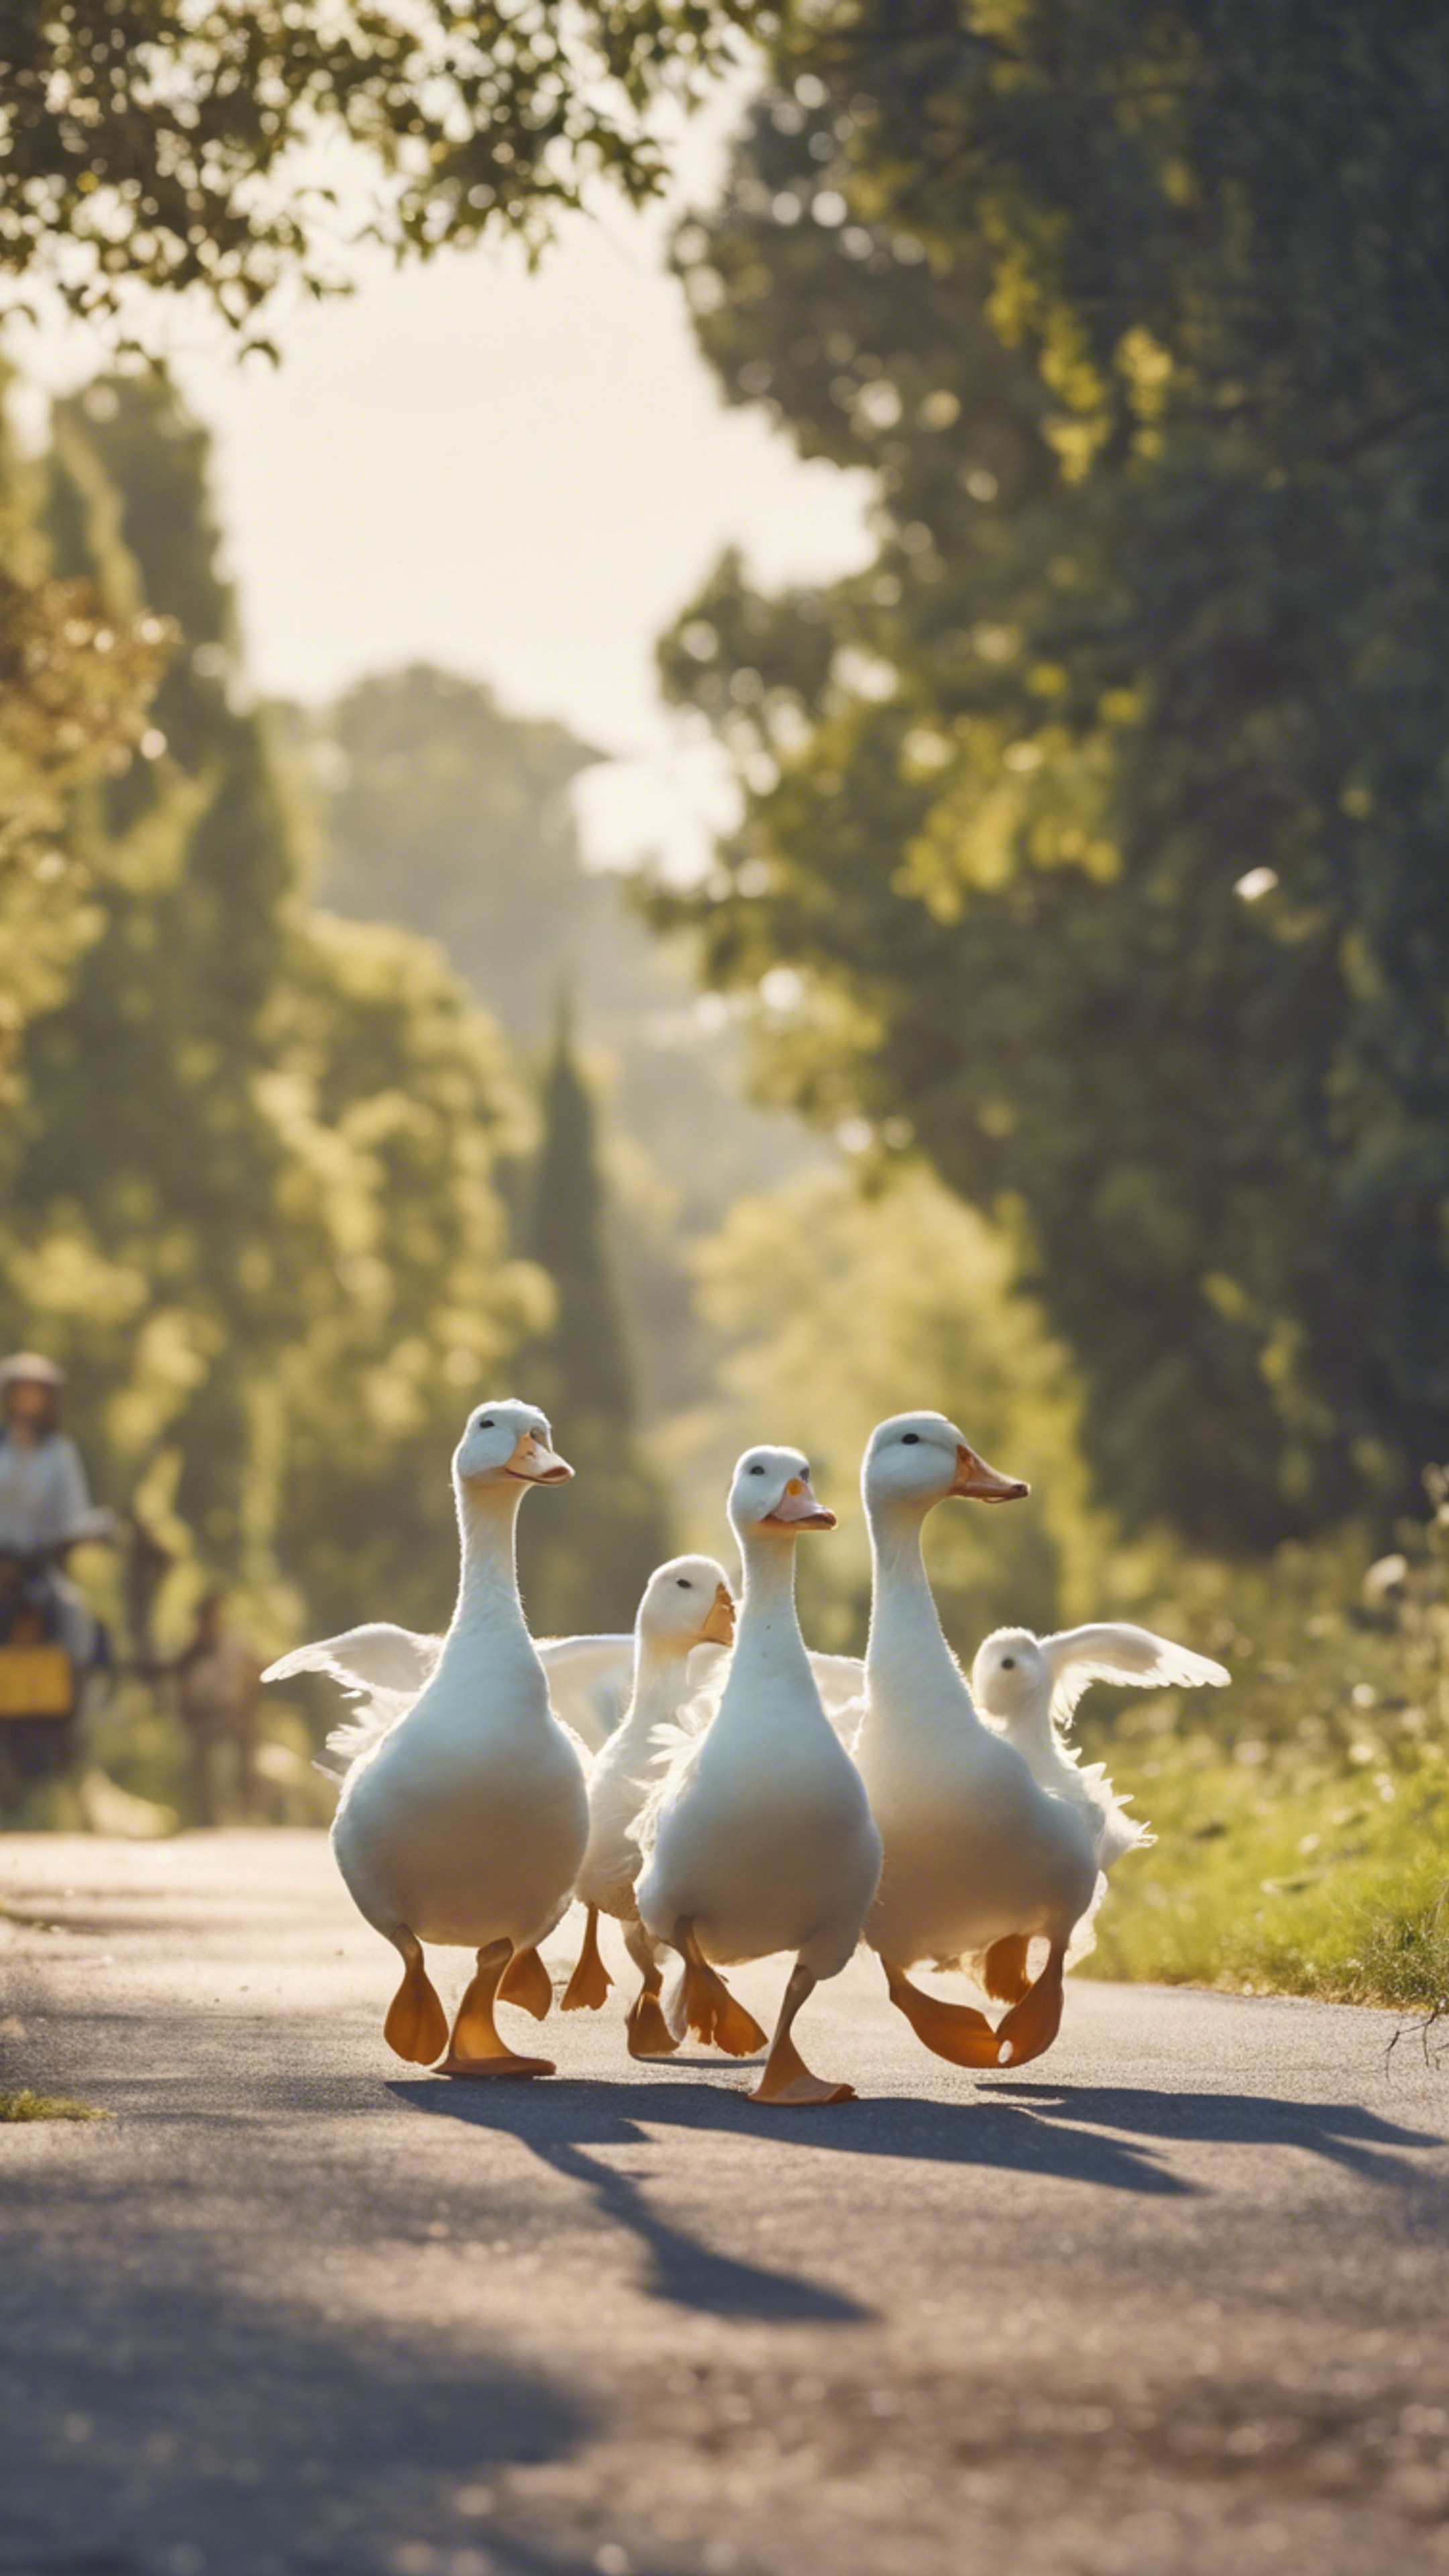 Flock of white ducks crossing a country road, led by a farm dog.壁紙[89272549ebd8471f8754]